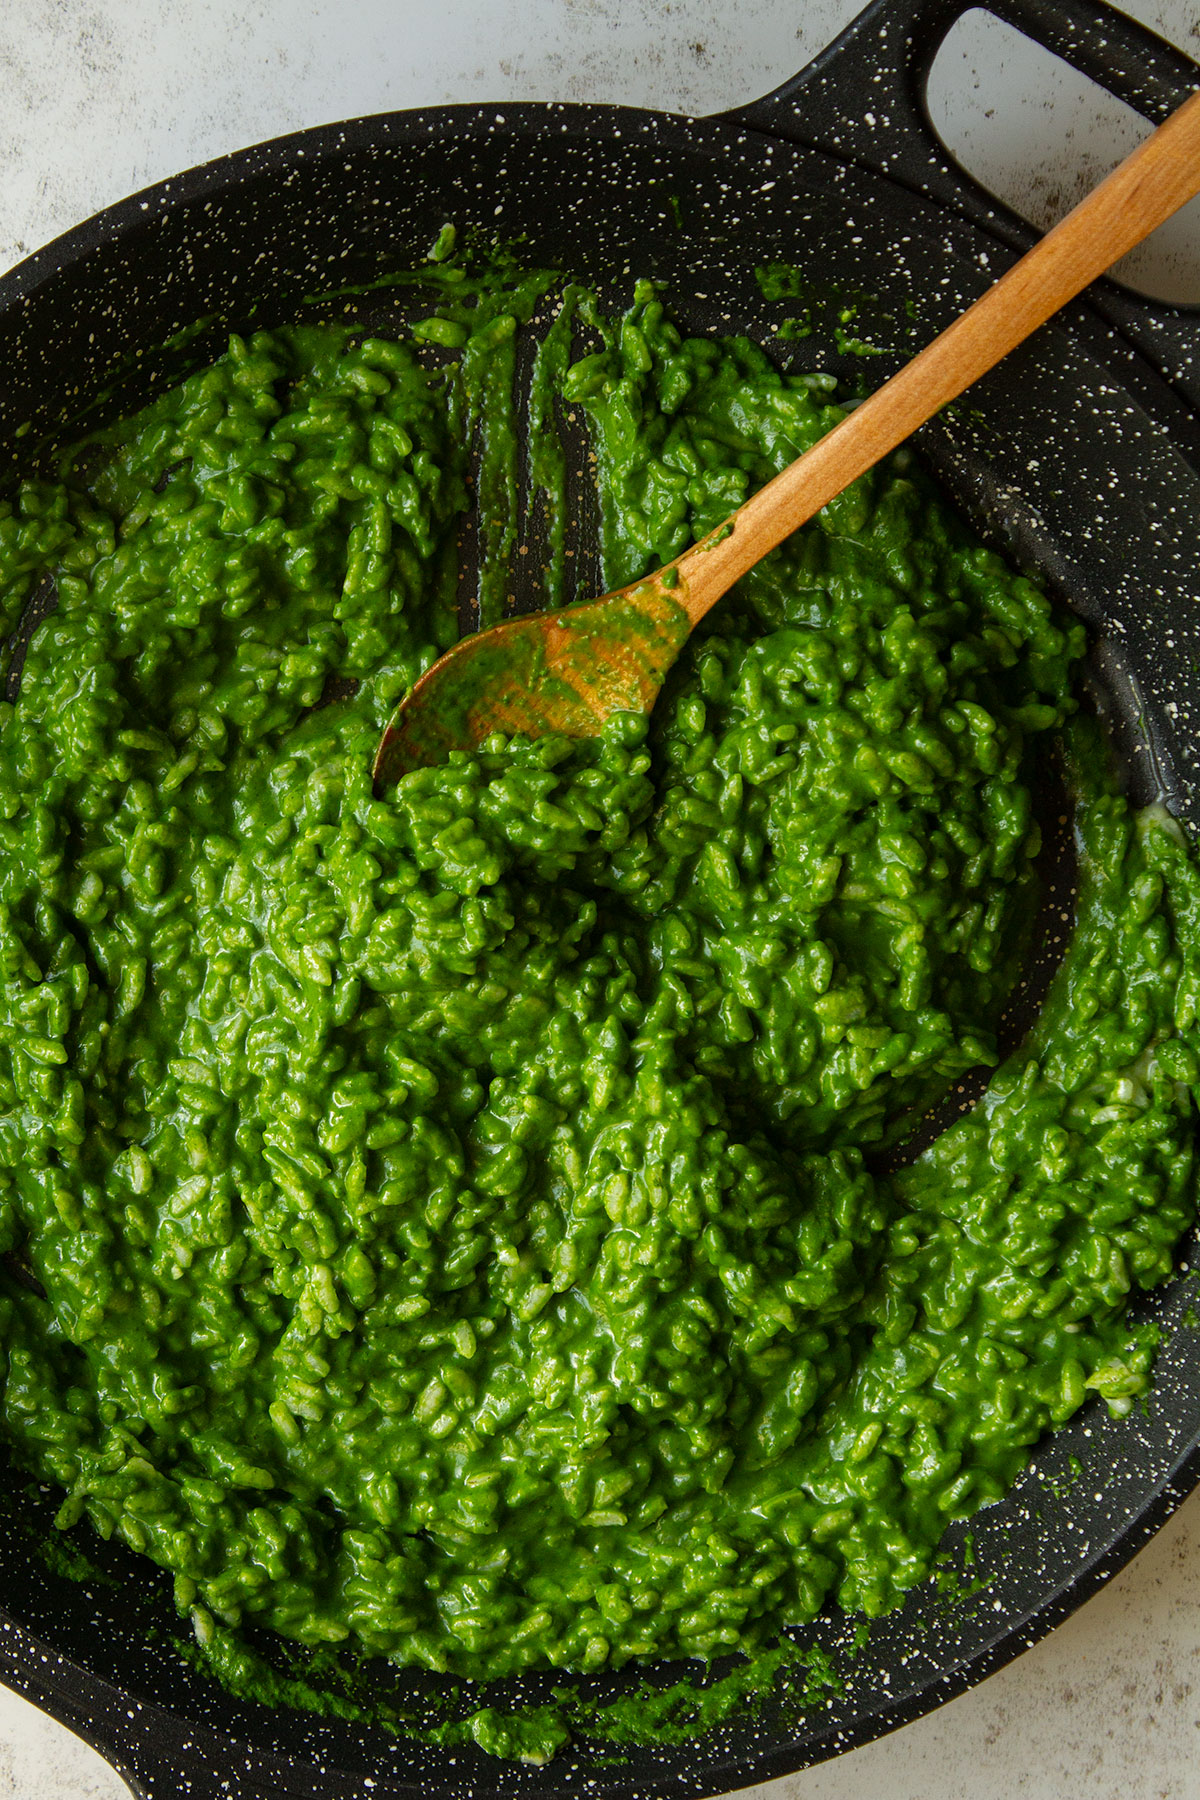 Stir the blended spinach mixture into the rice with a wooden spoon in a dark coloured skillet.